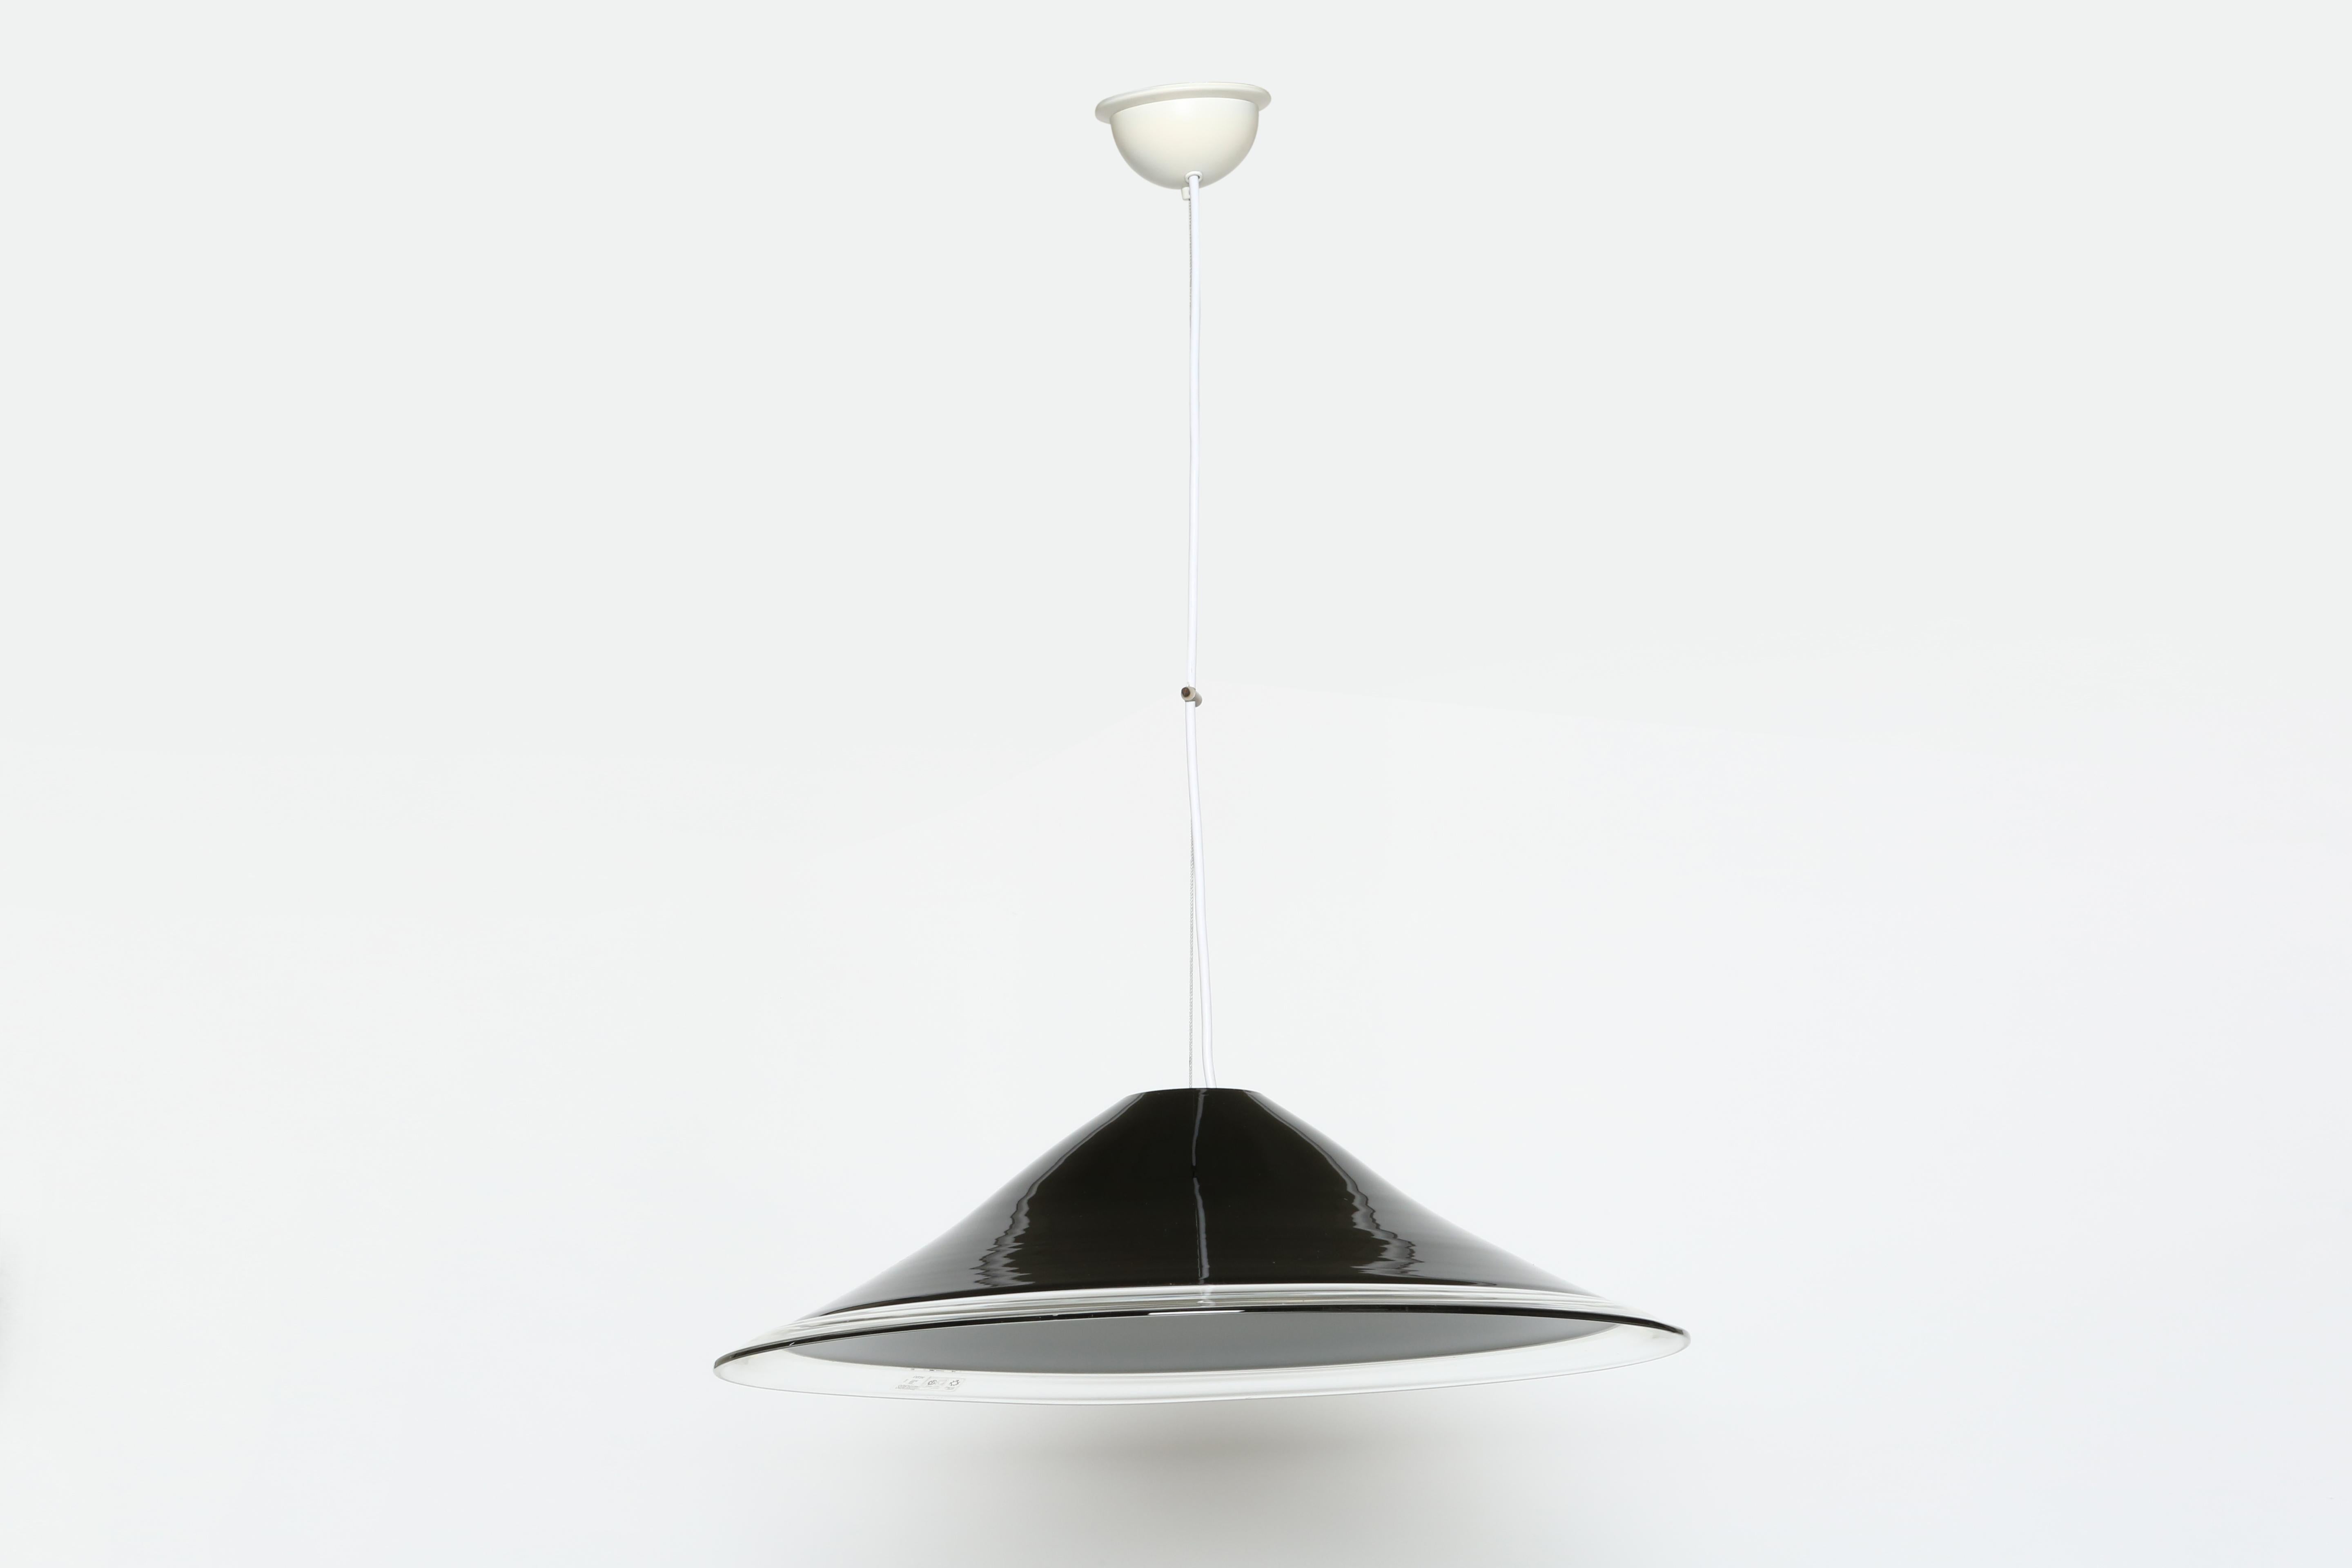 Ceiling pendant by Renato Toso for Leucos.
Made in Italy in 1960s.
Murano glass black on the top and white inside the shade with a clear edge.
Very heavy impressive glass.
Rewired for US
4 pendants available. Priced per item.

We take pride in